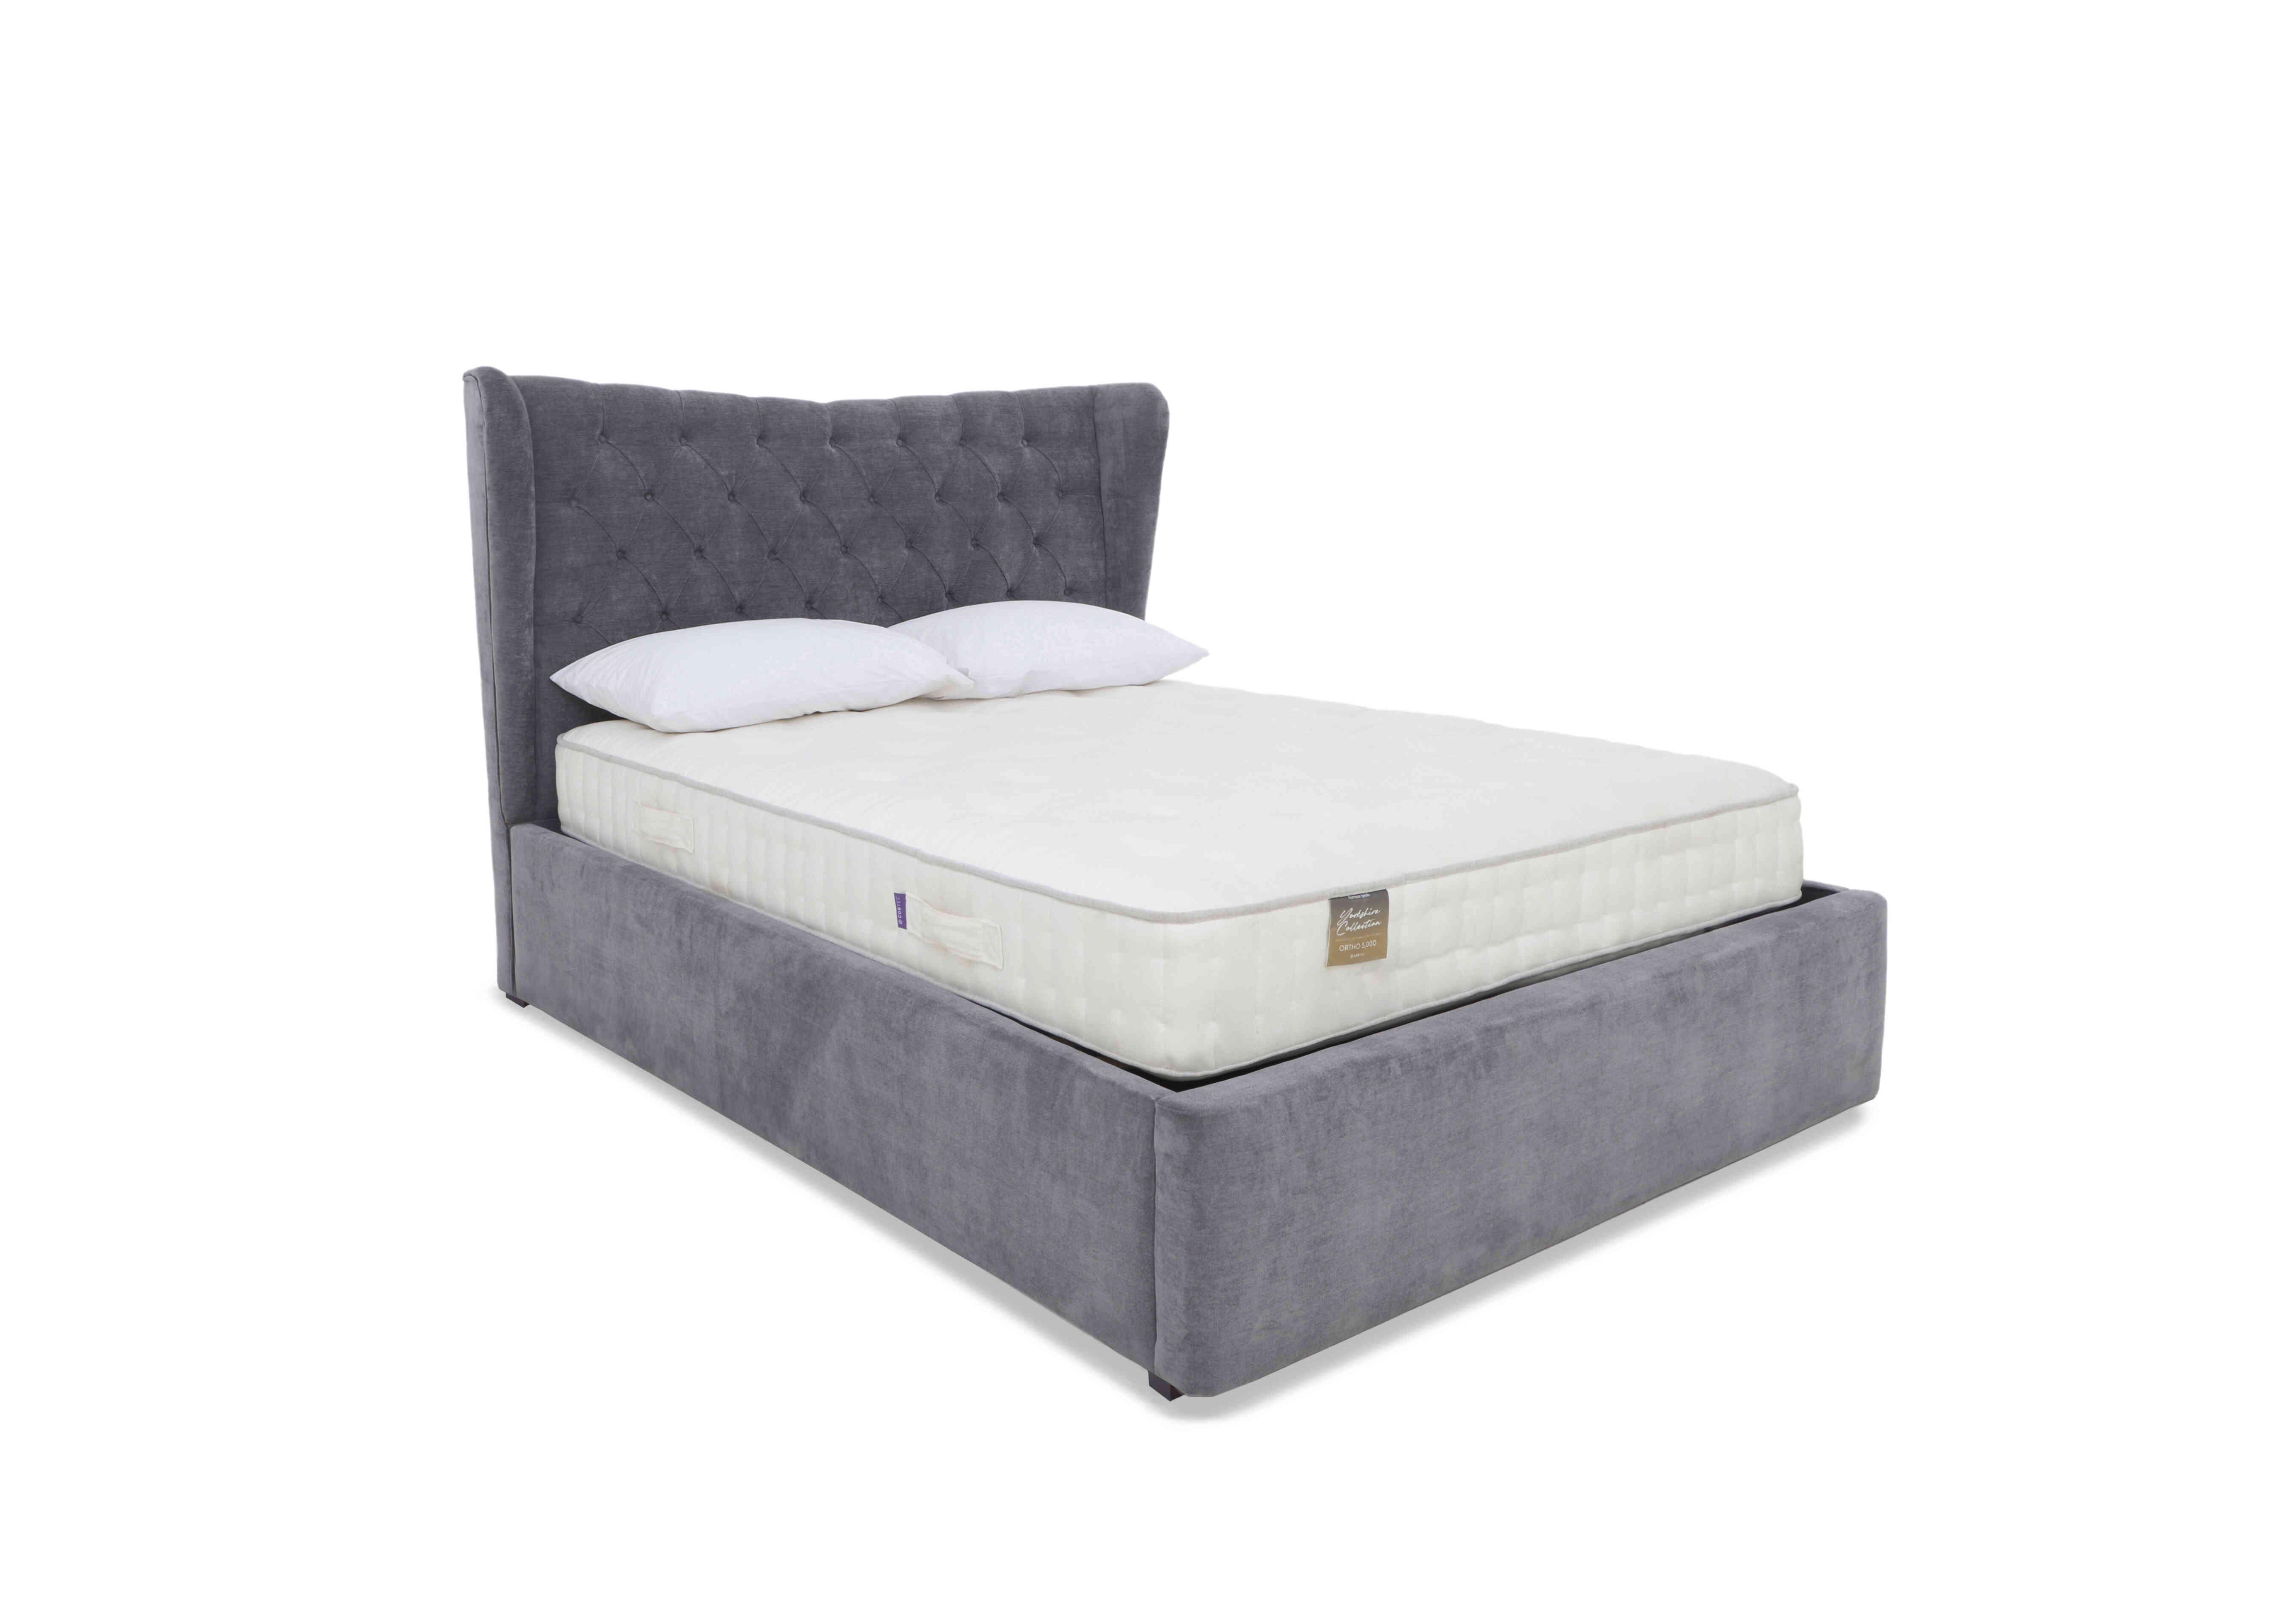 Bauer Electric Ottoman Bed Frame in Aston Steel on Furniture Village